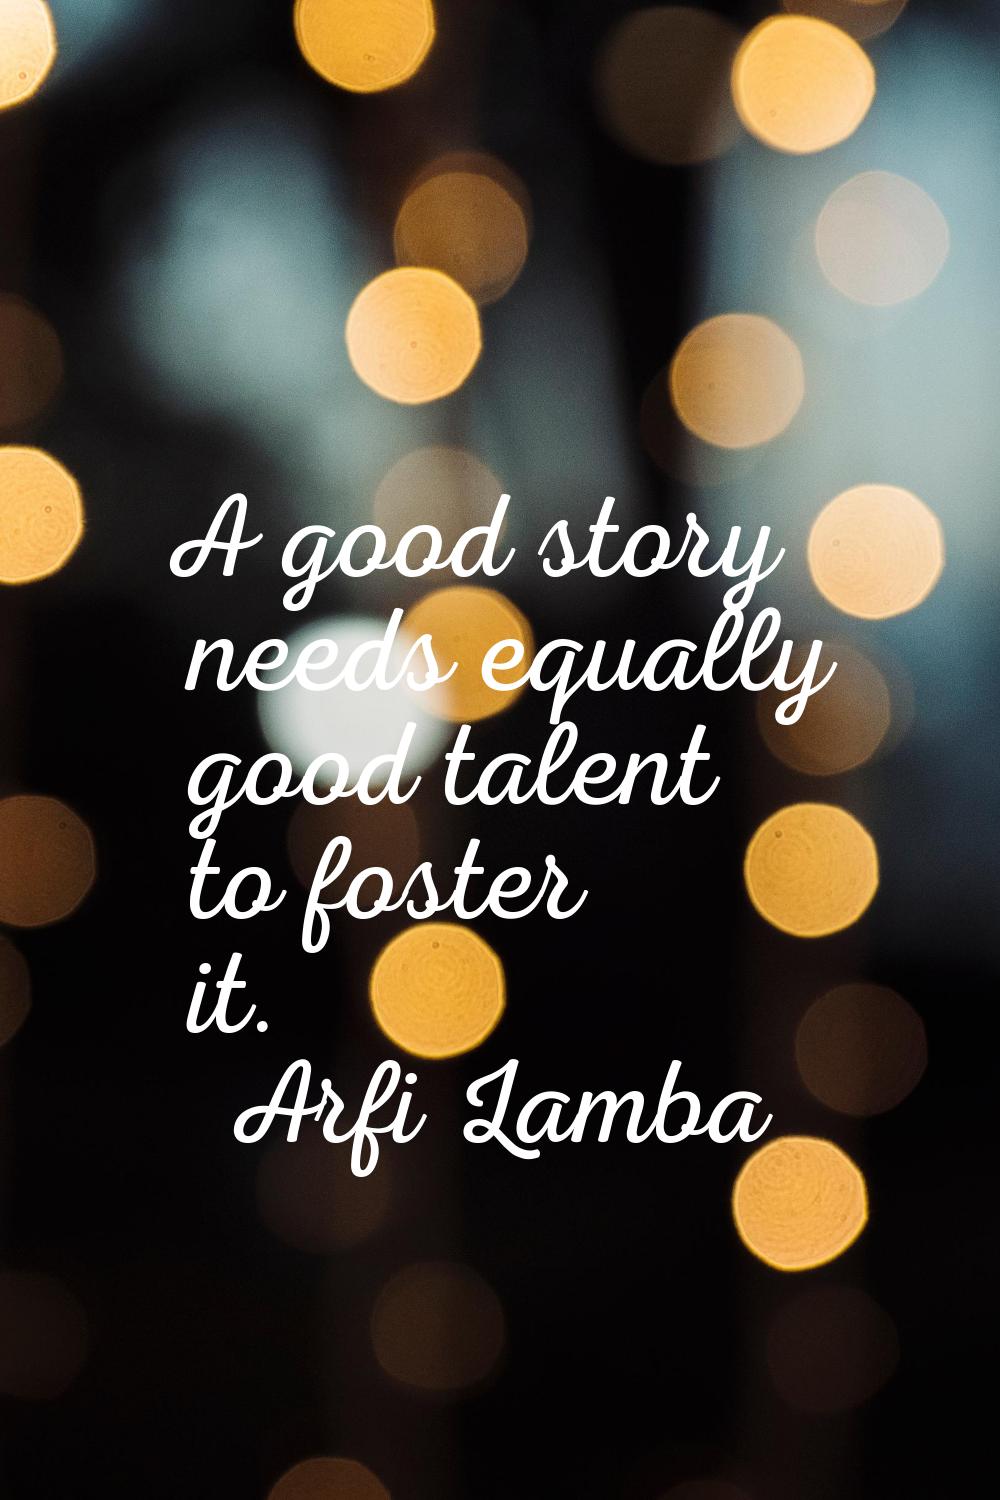 A good story needs equally good talent to foster it.